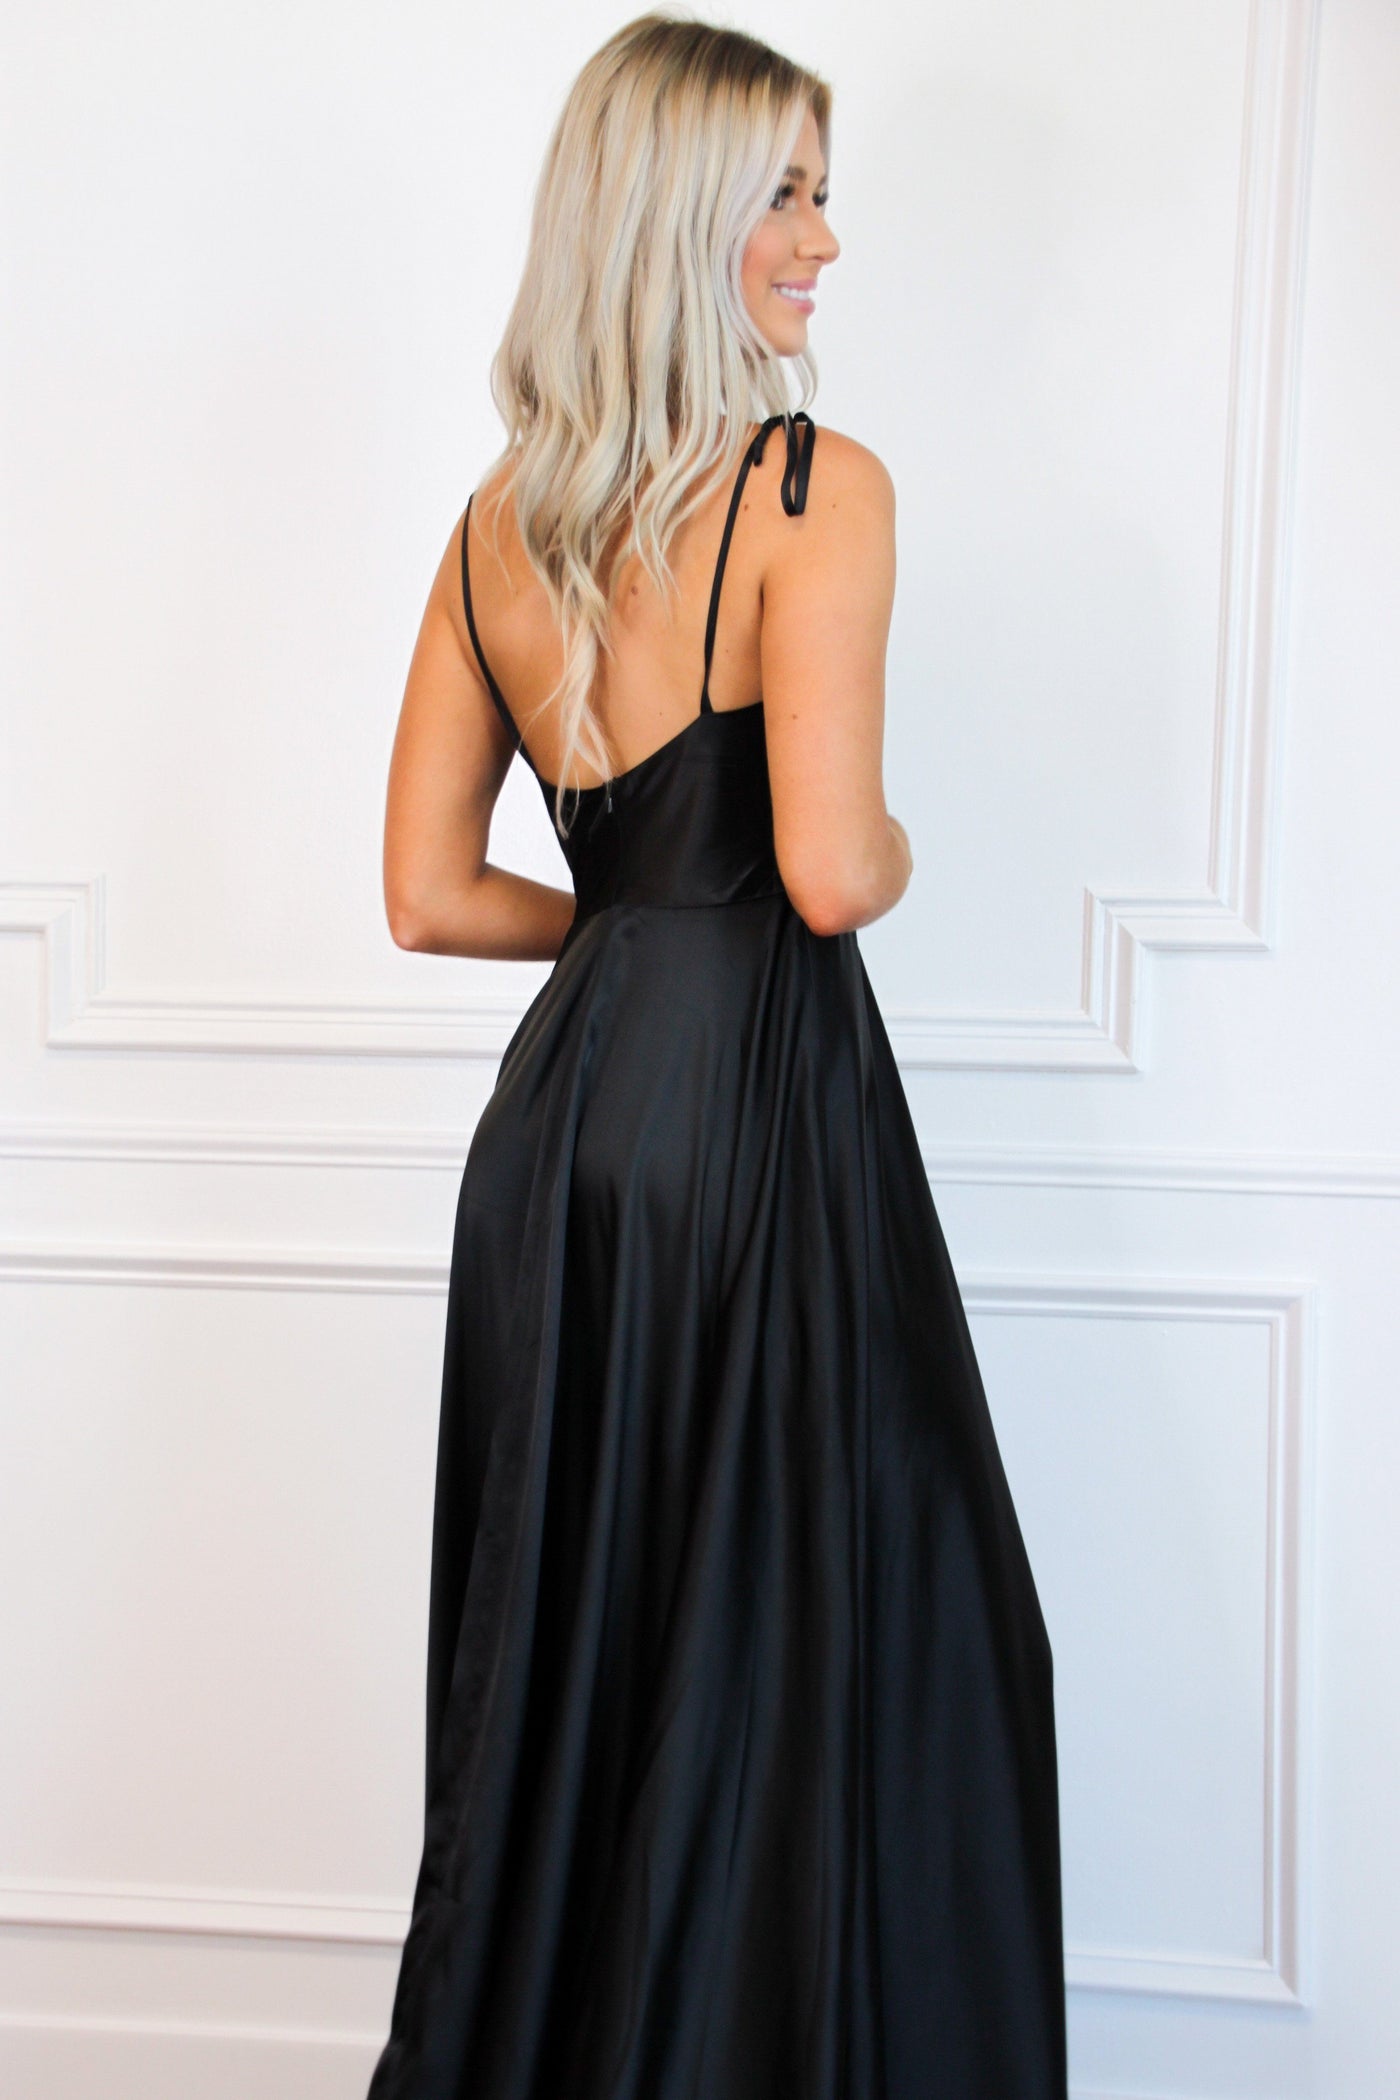 Tonight's the Night Satin Formal Dress: Black - Bella and Bloom Boutique